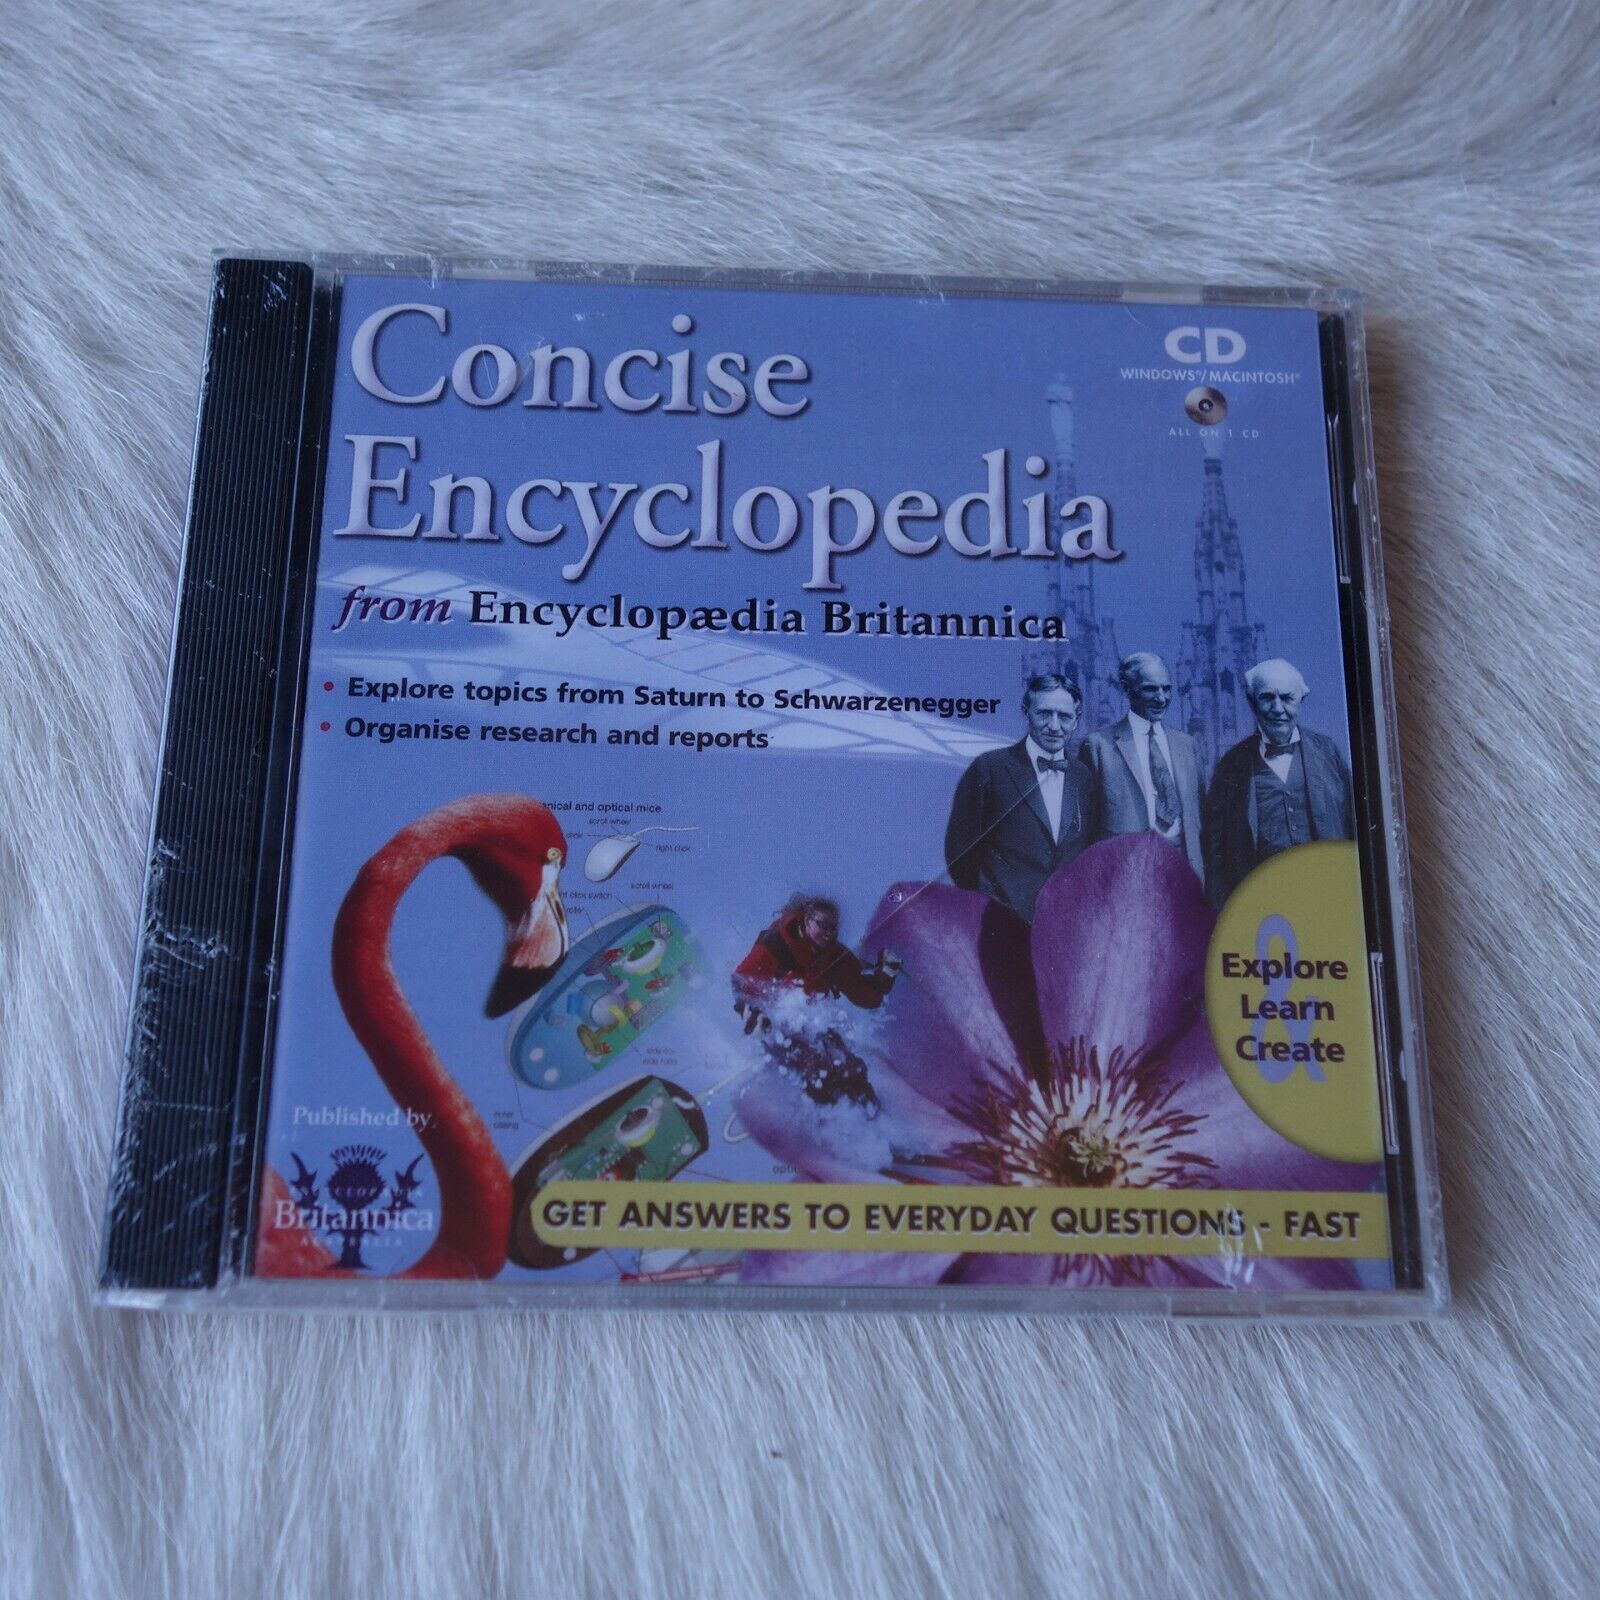 CONCISE ENCYCLOPEDIA PC CD-ROM Encyclopaedia Britannica CD-ROM 2004 OUT OF PRINT